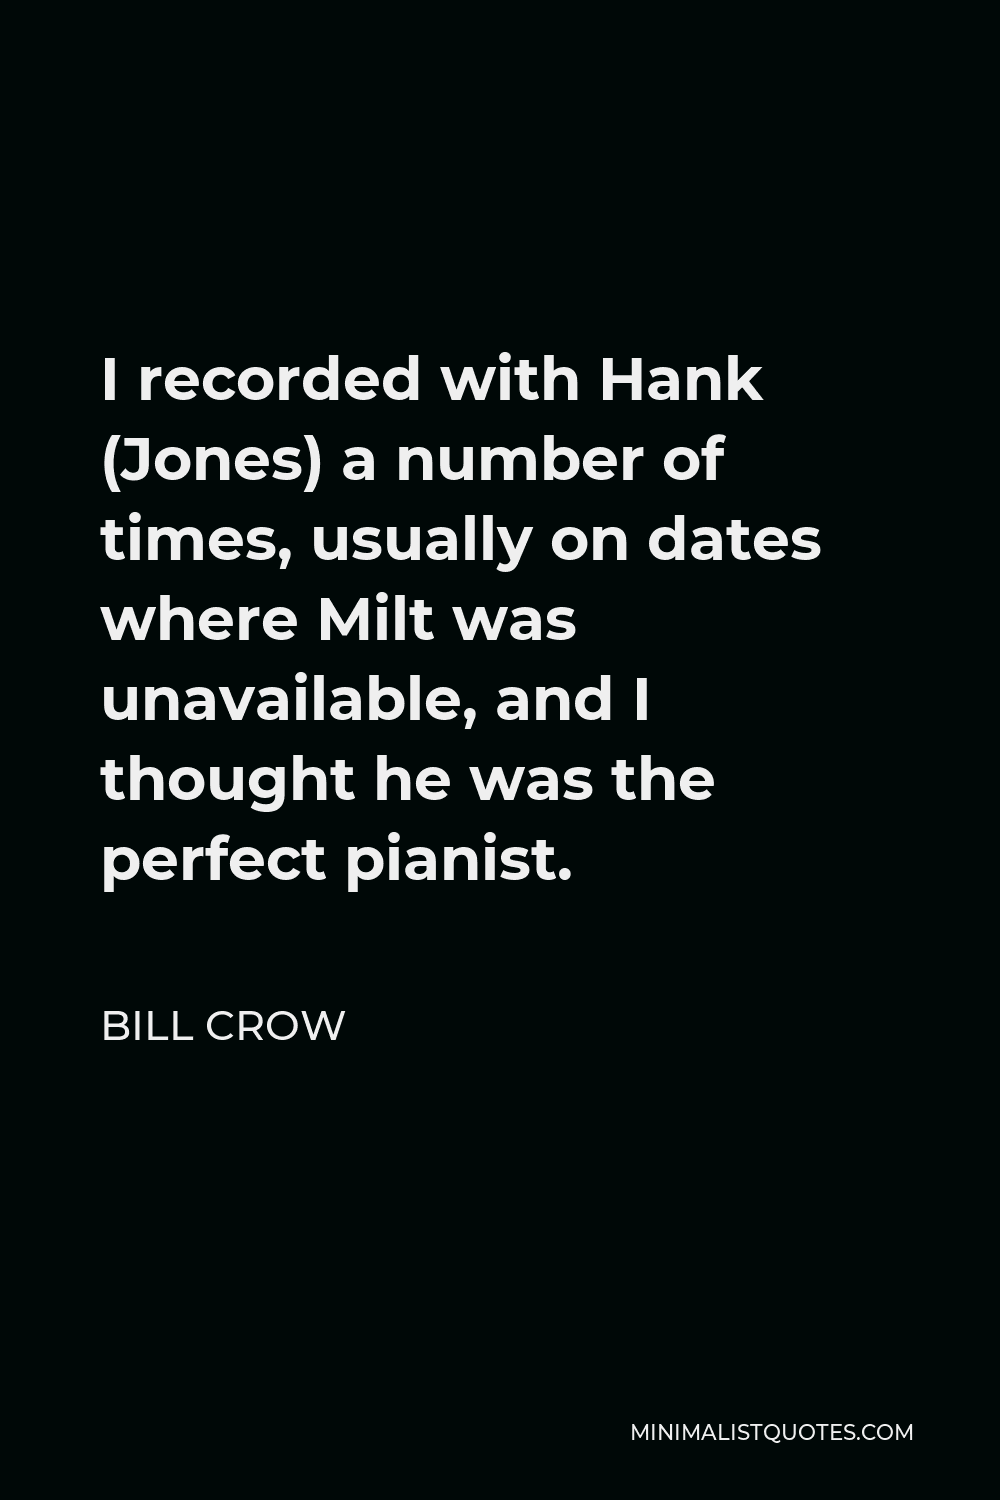 Bill Crow Quote - I recorded with Hank (Jones) a number of times, usually on dates where Milt was unavailable, and I thought he was the perfect pianist.